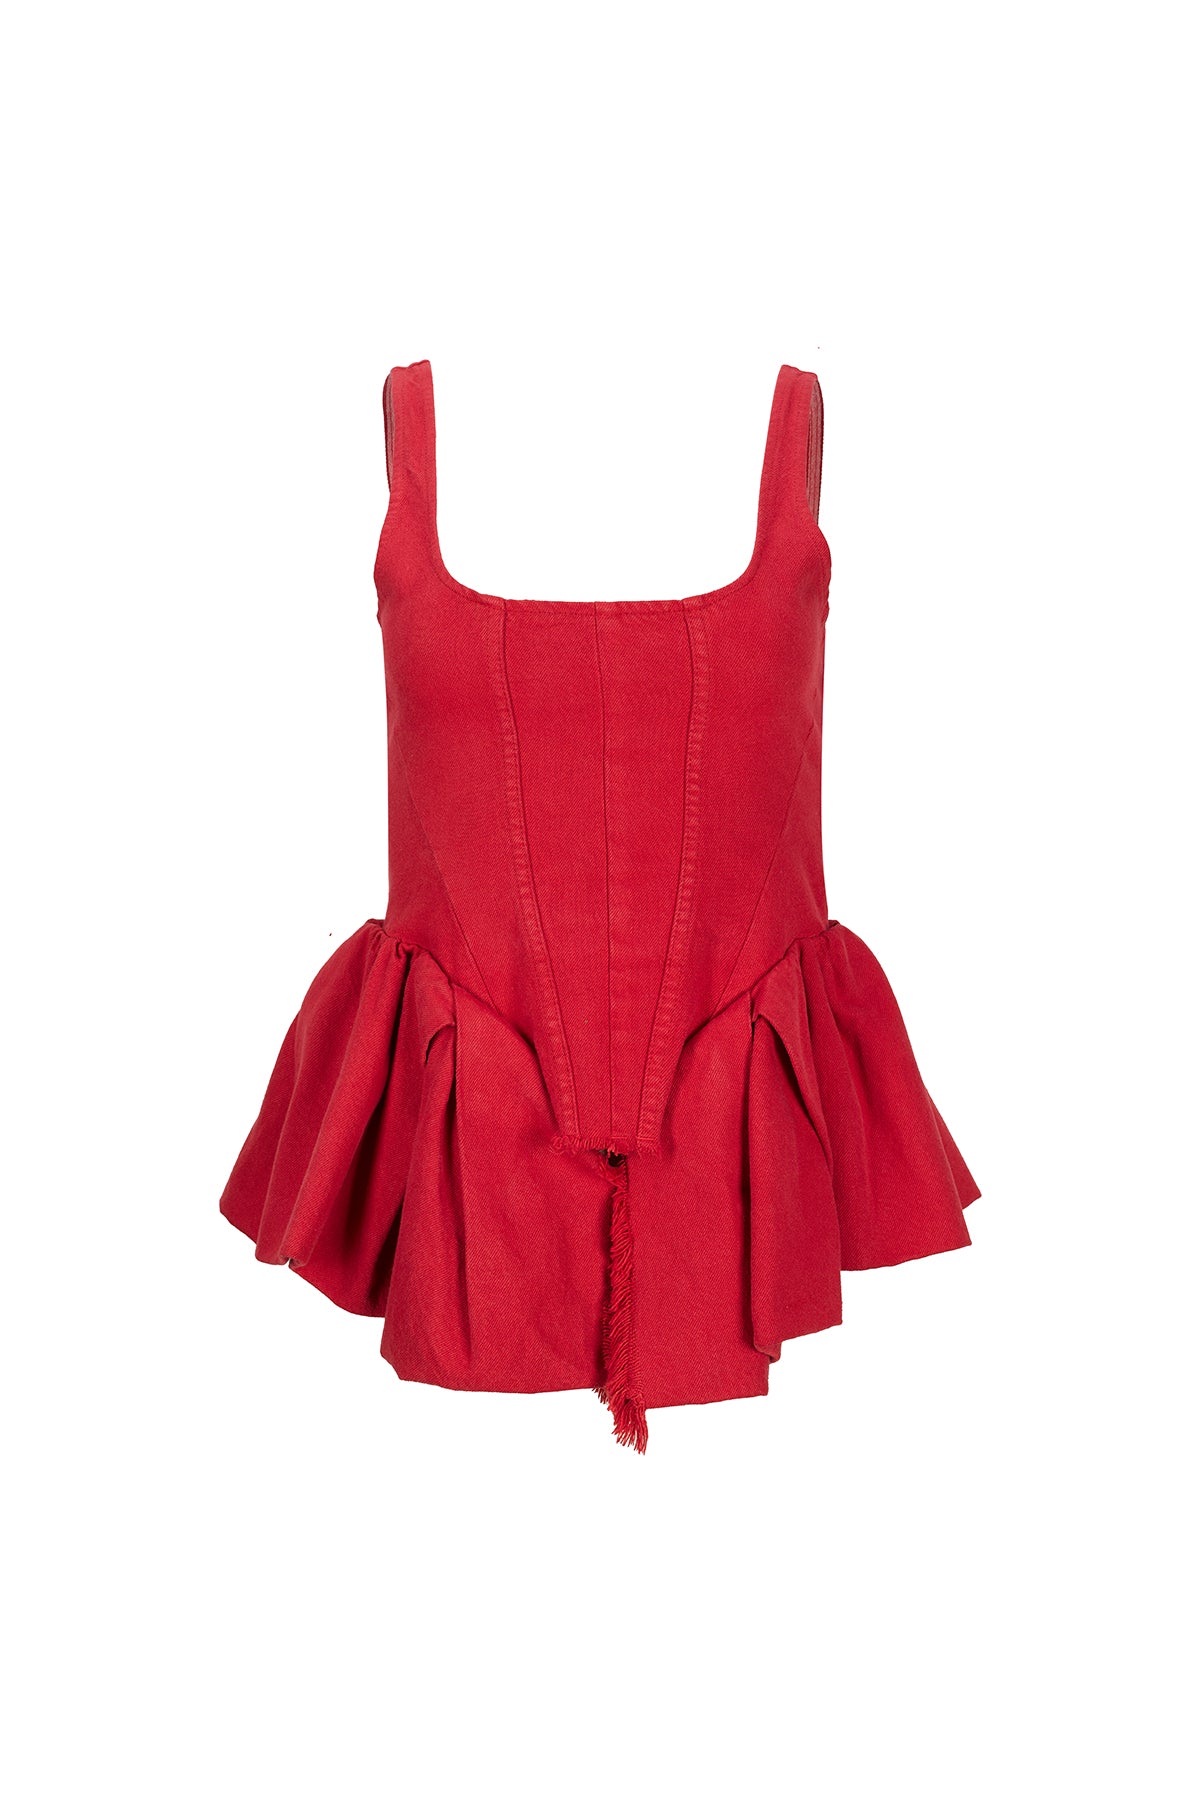 RED CORSET WITH PLEATED HIP PANELS marques almeida